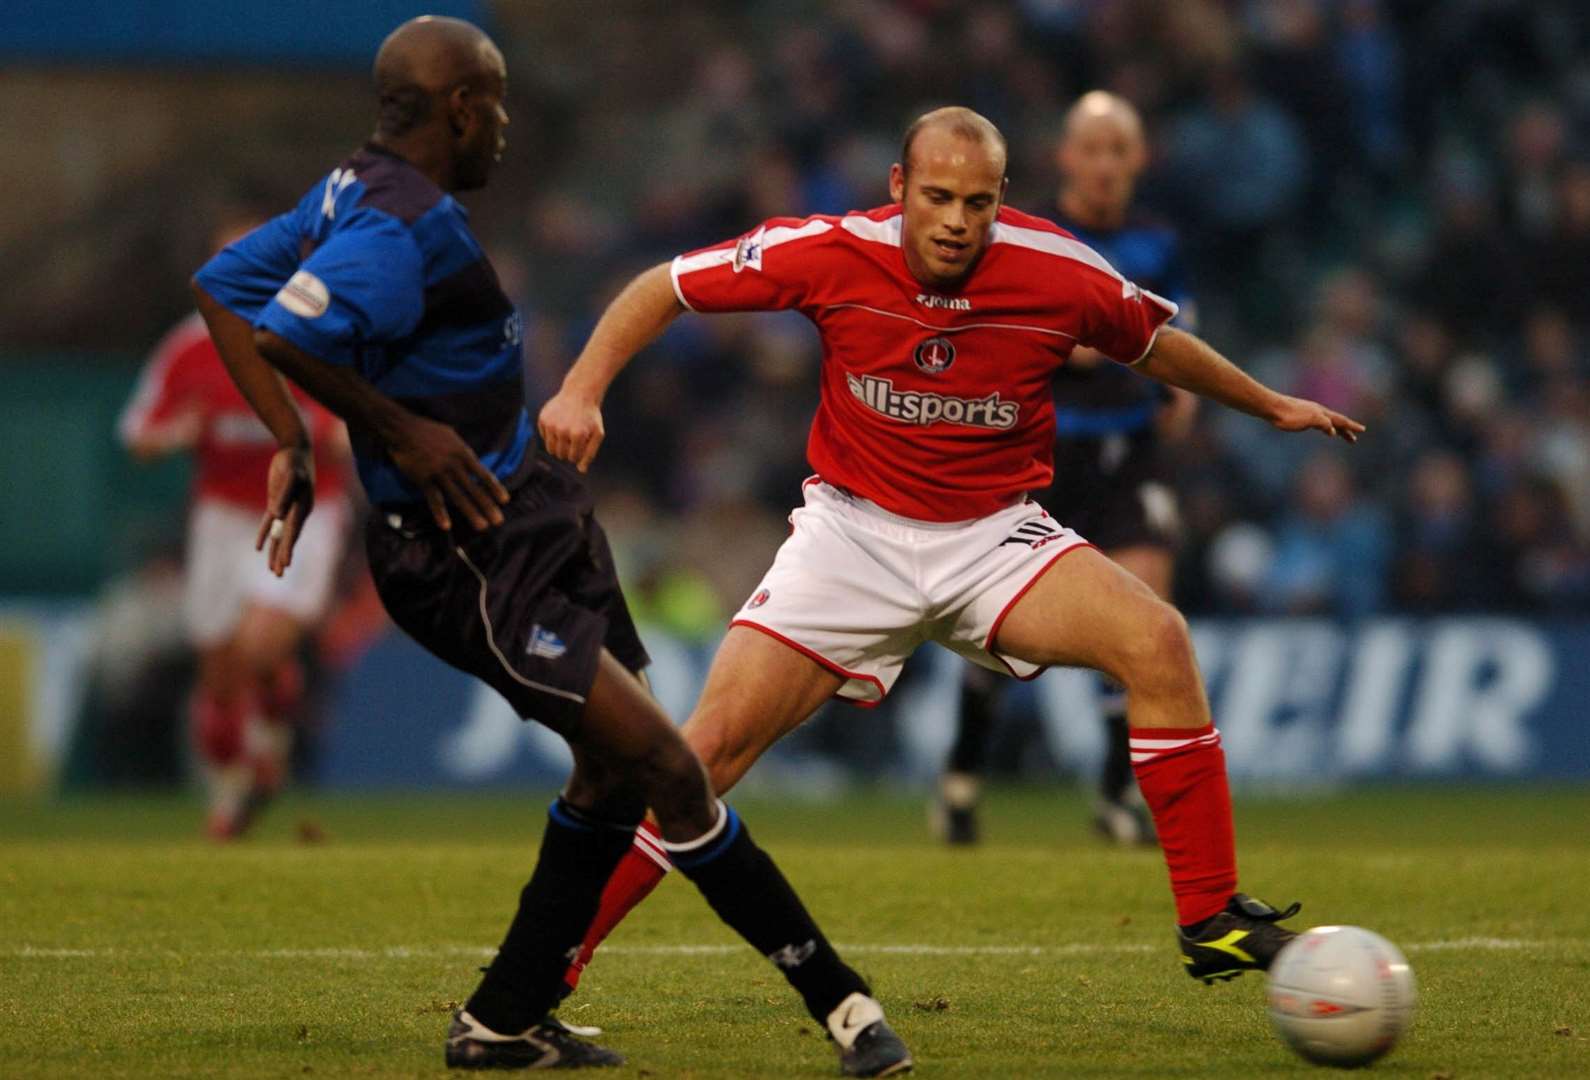 Charlton Athletic's Claus Jensen and Nyron Nosworthy